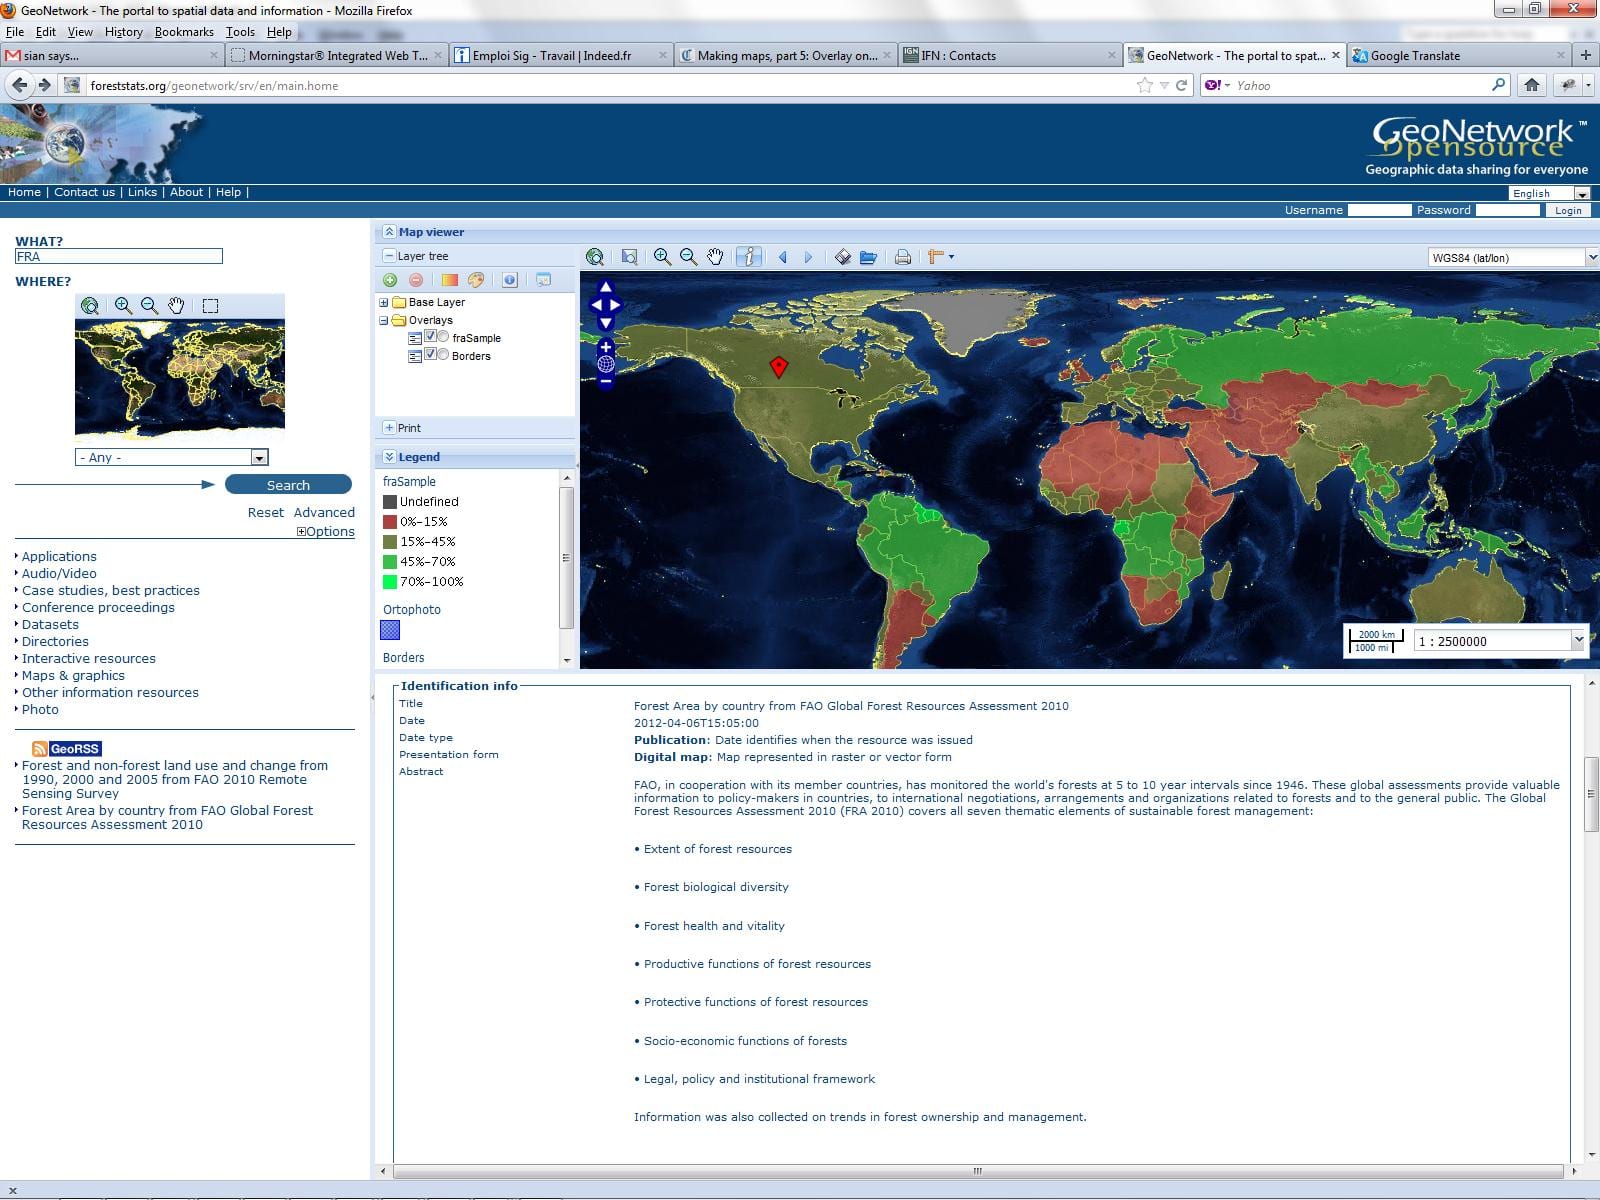 Screenshot of the FAO FRA GeoNetwork Metadata catlogue showing an example of forest area as percentage of total country area for the year 2000.